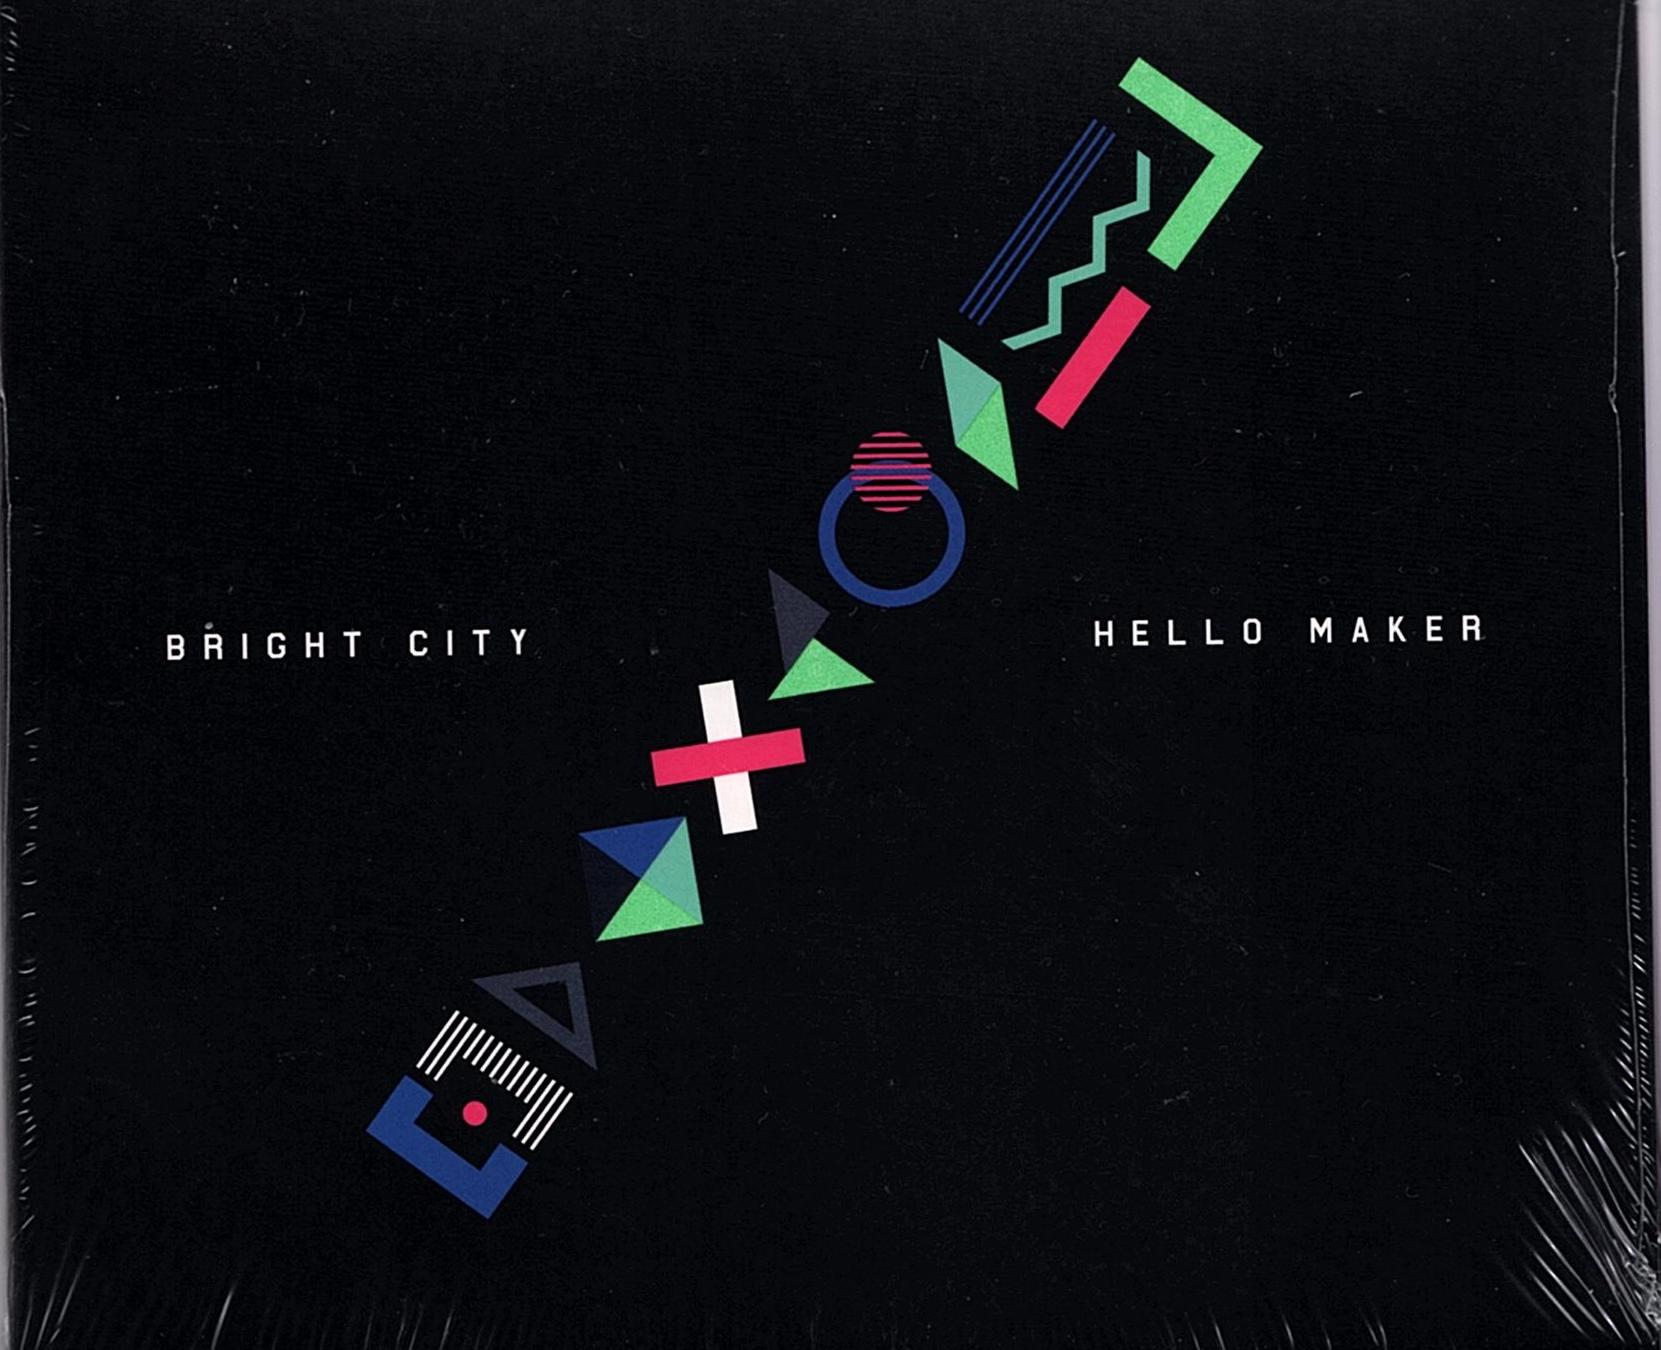 More information on Hello Maker Bright City